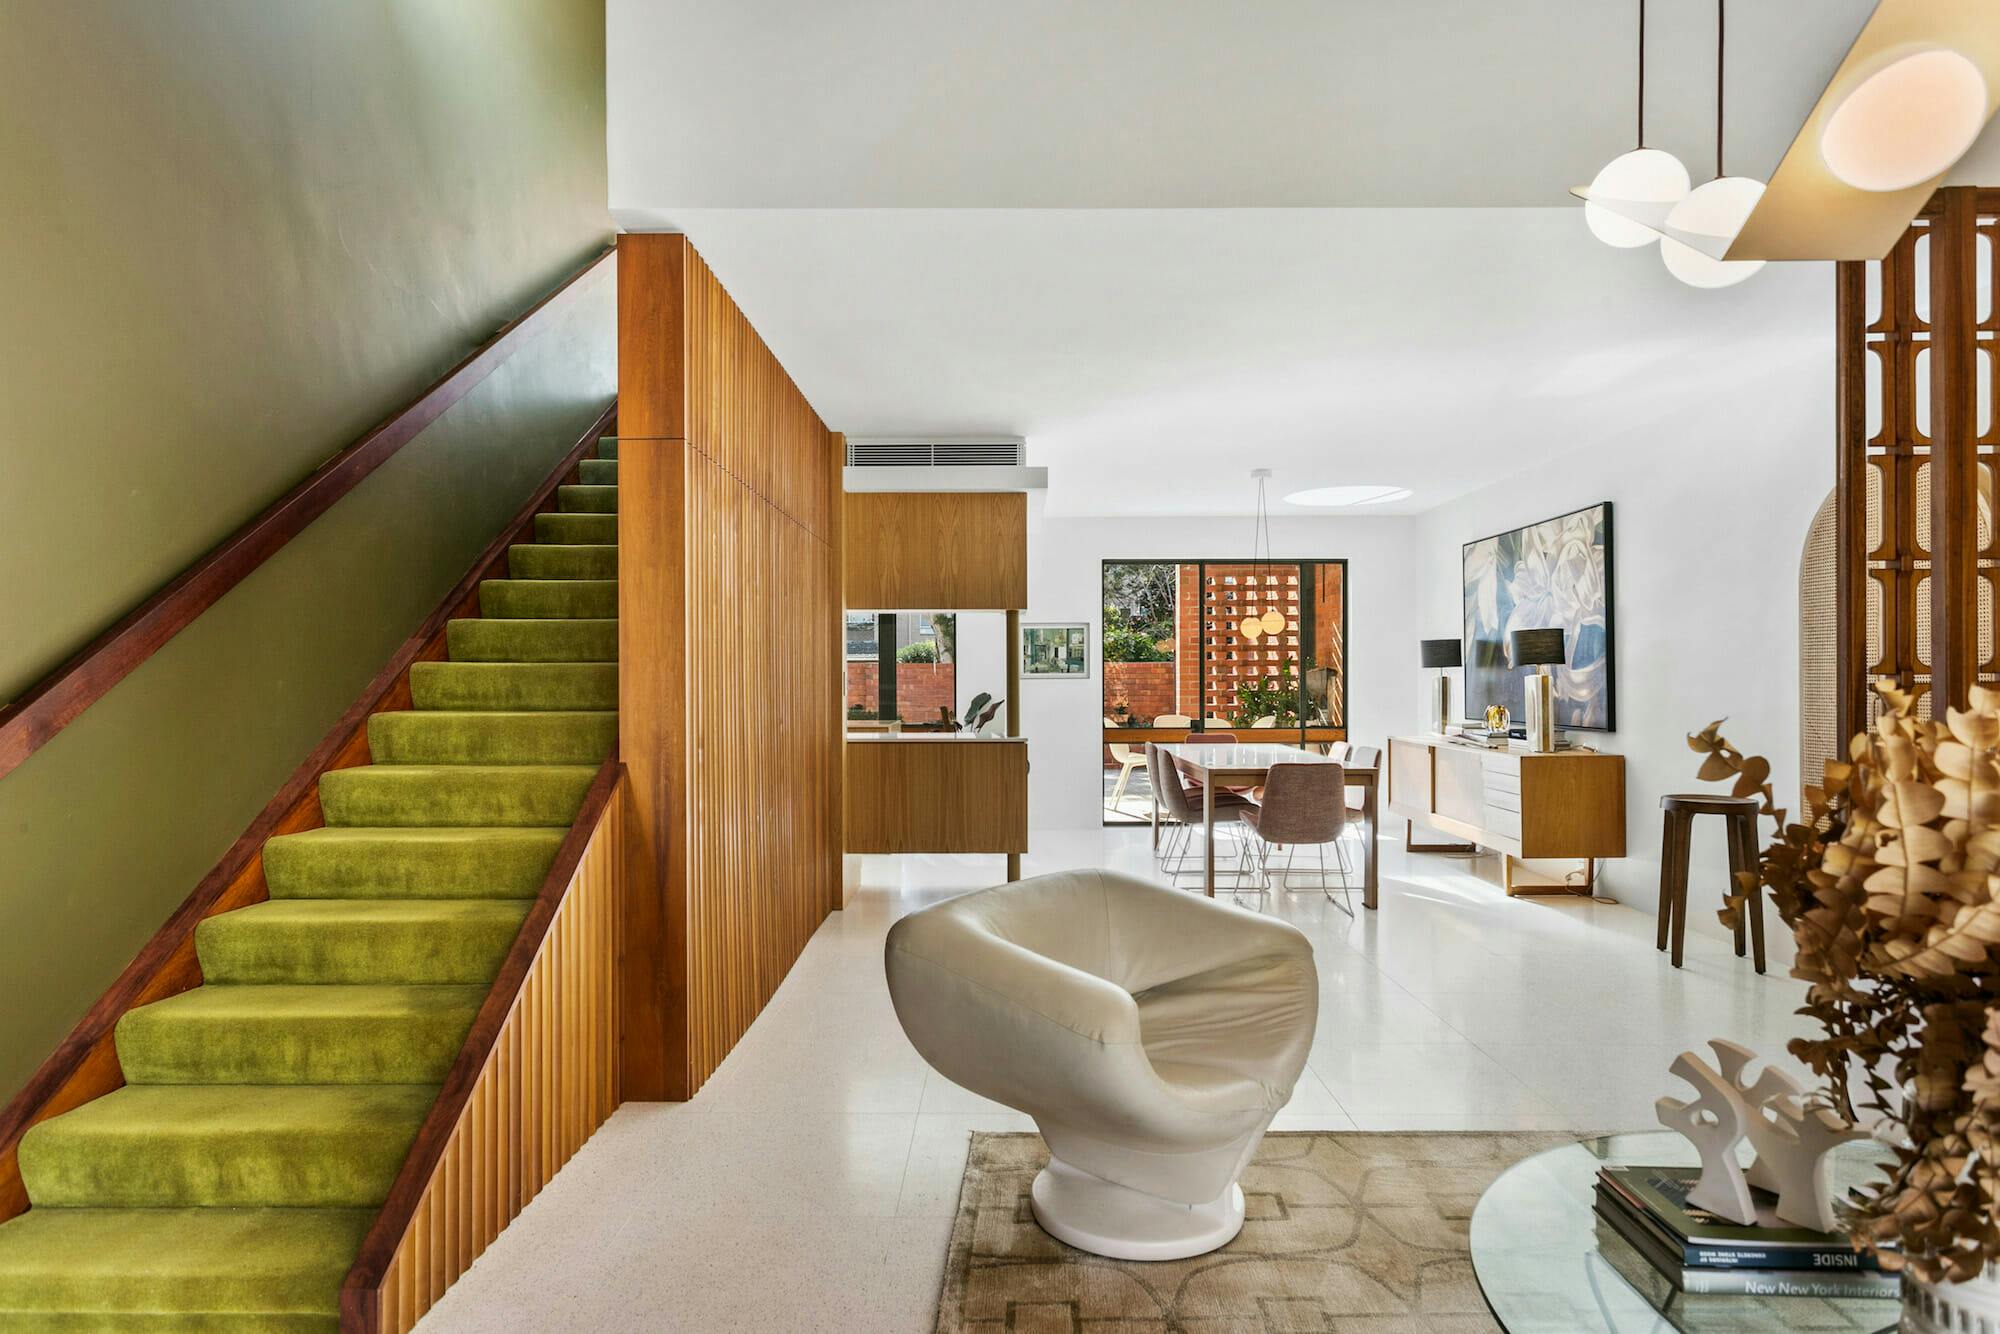 This Brand New Airbnb Is A Midcentury Masterpiece